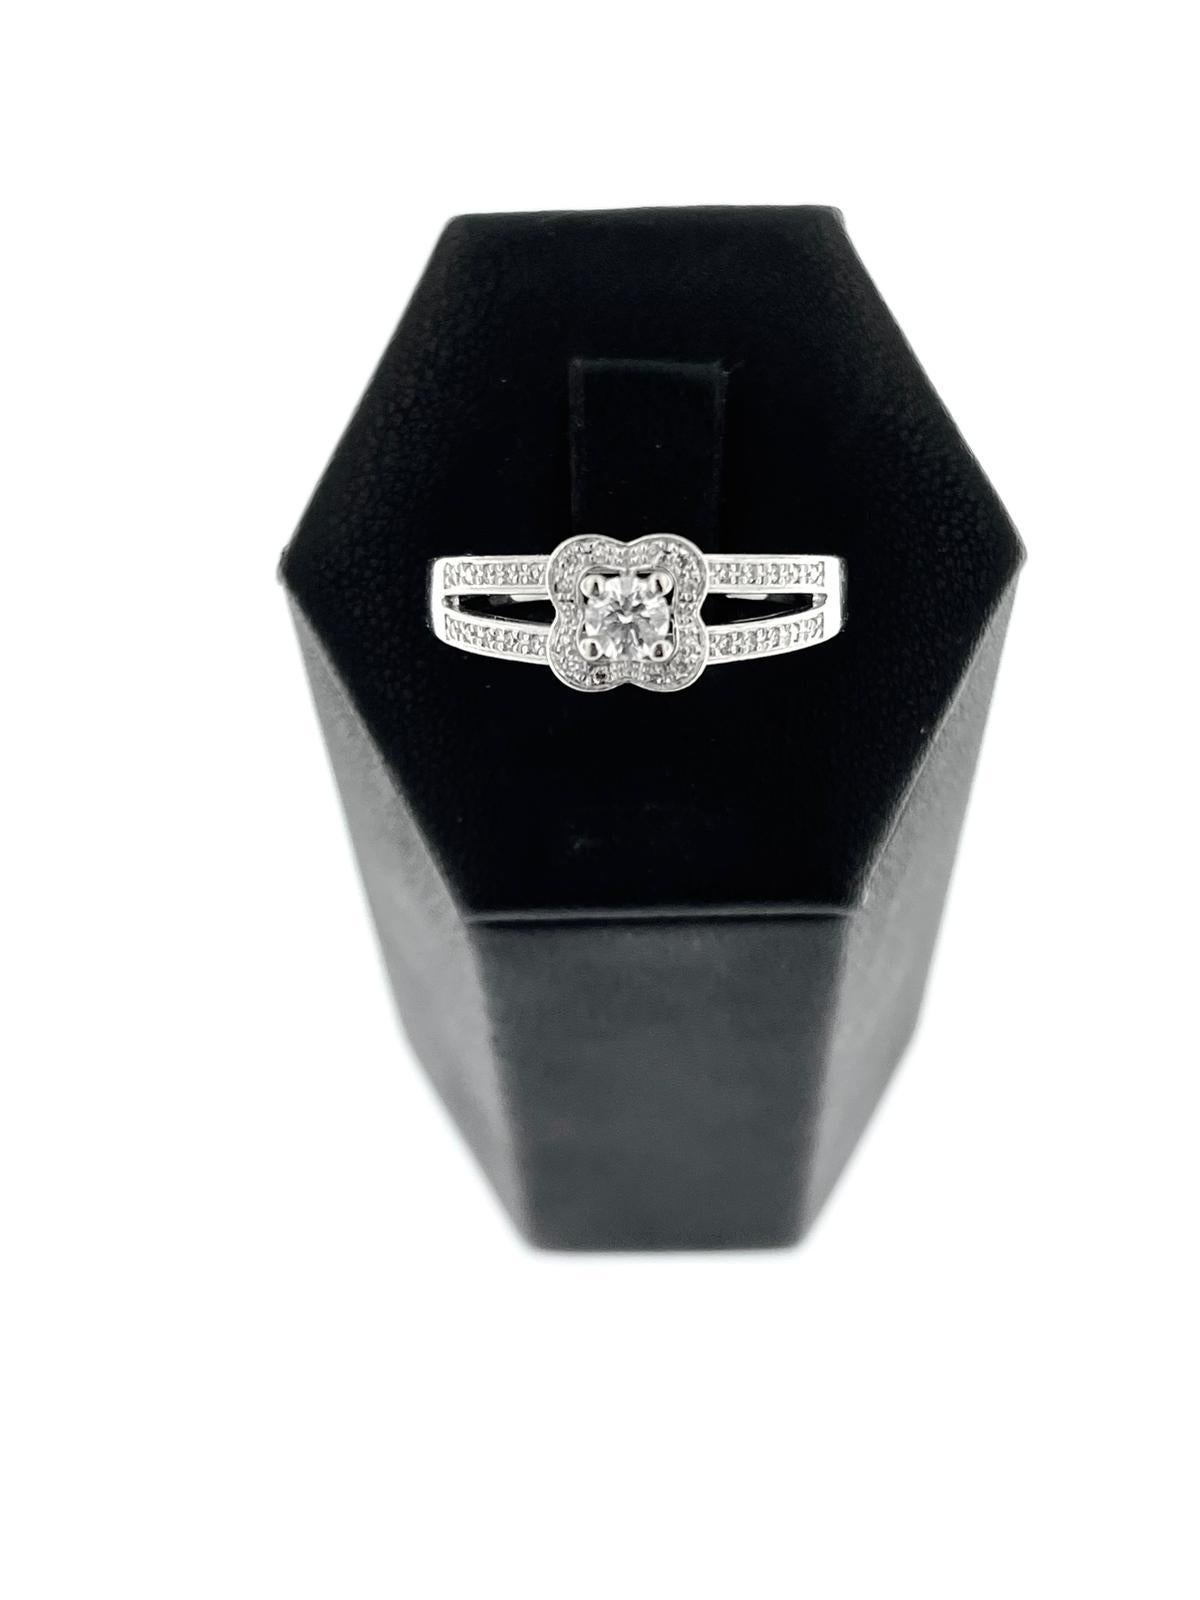 Mauboussin Chance of Love N°2 White Gold Engagement Ring with Diamonds For Sale 2